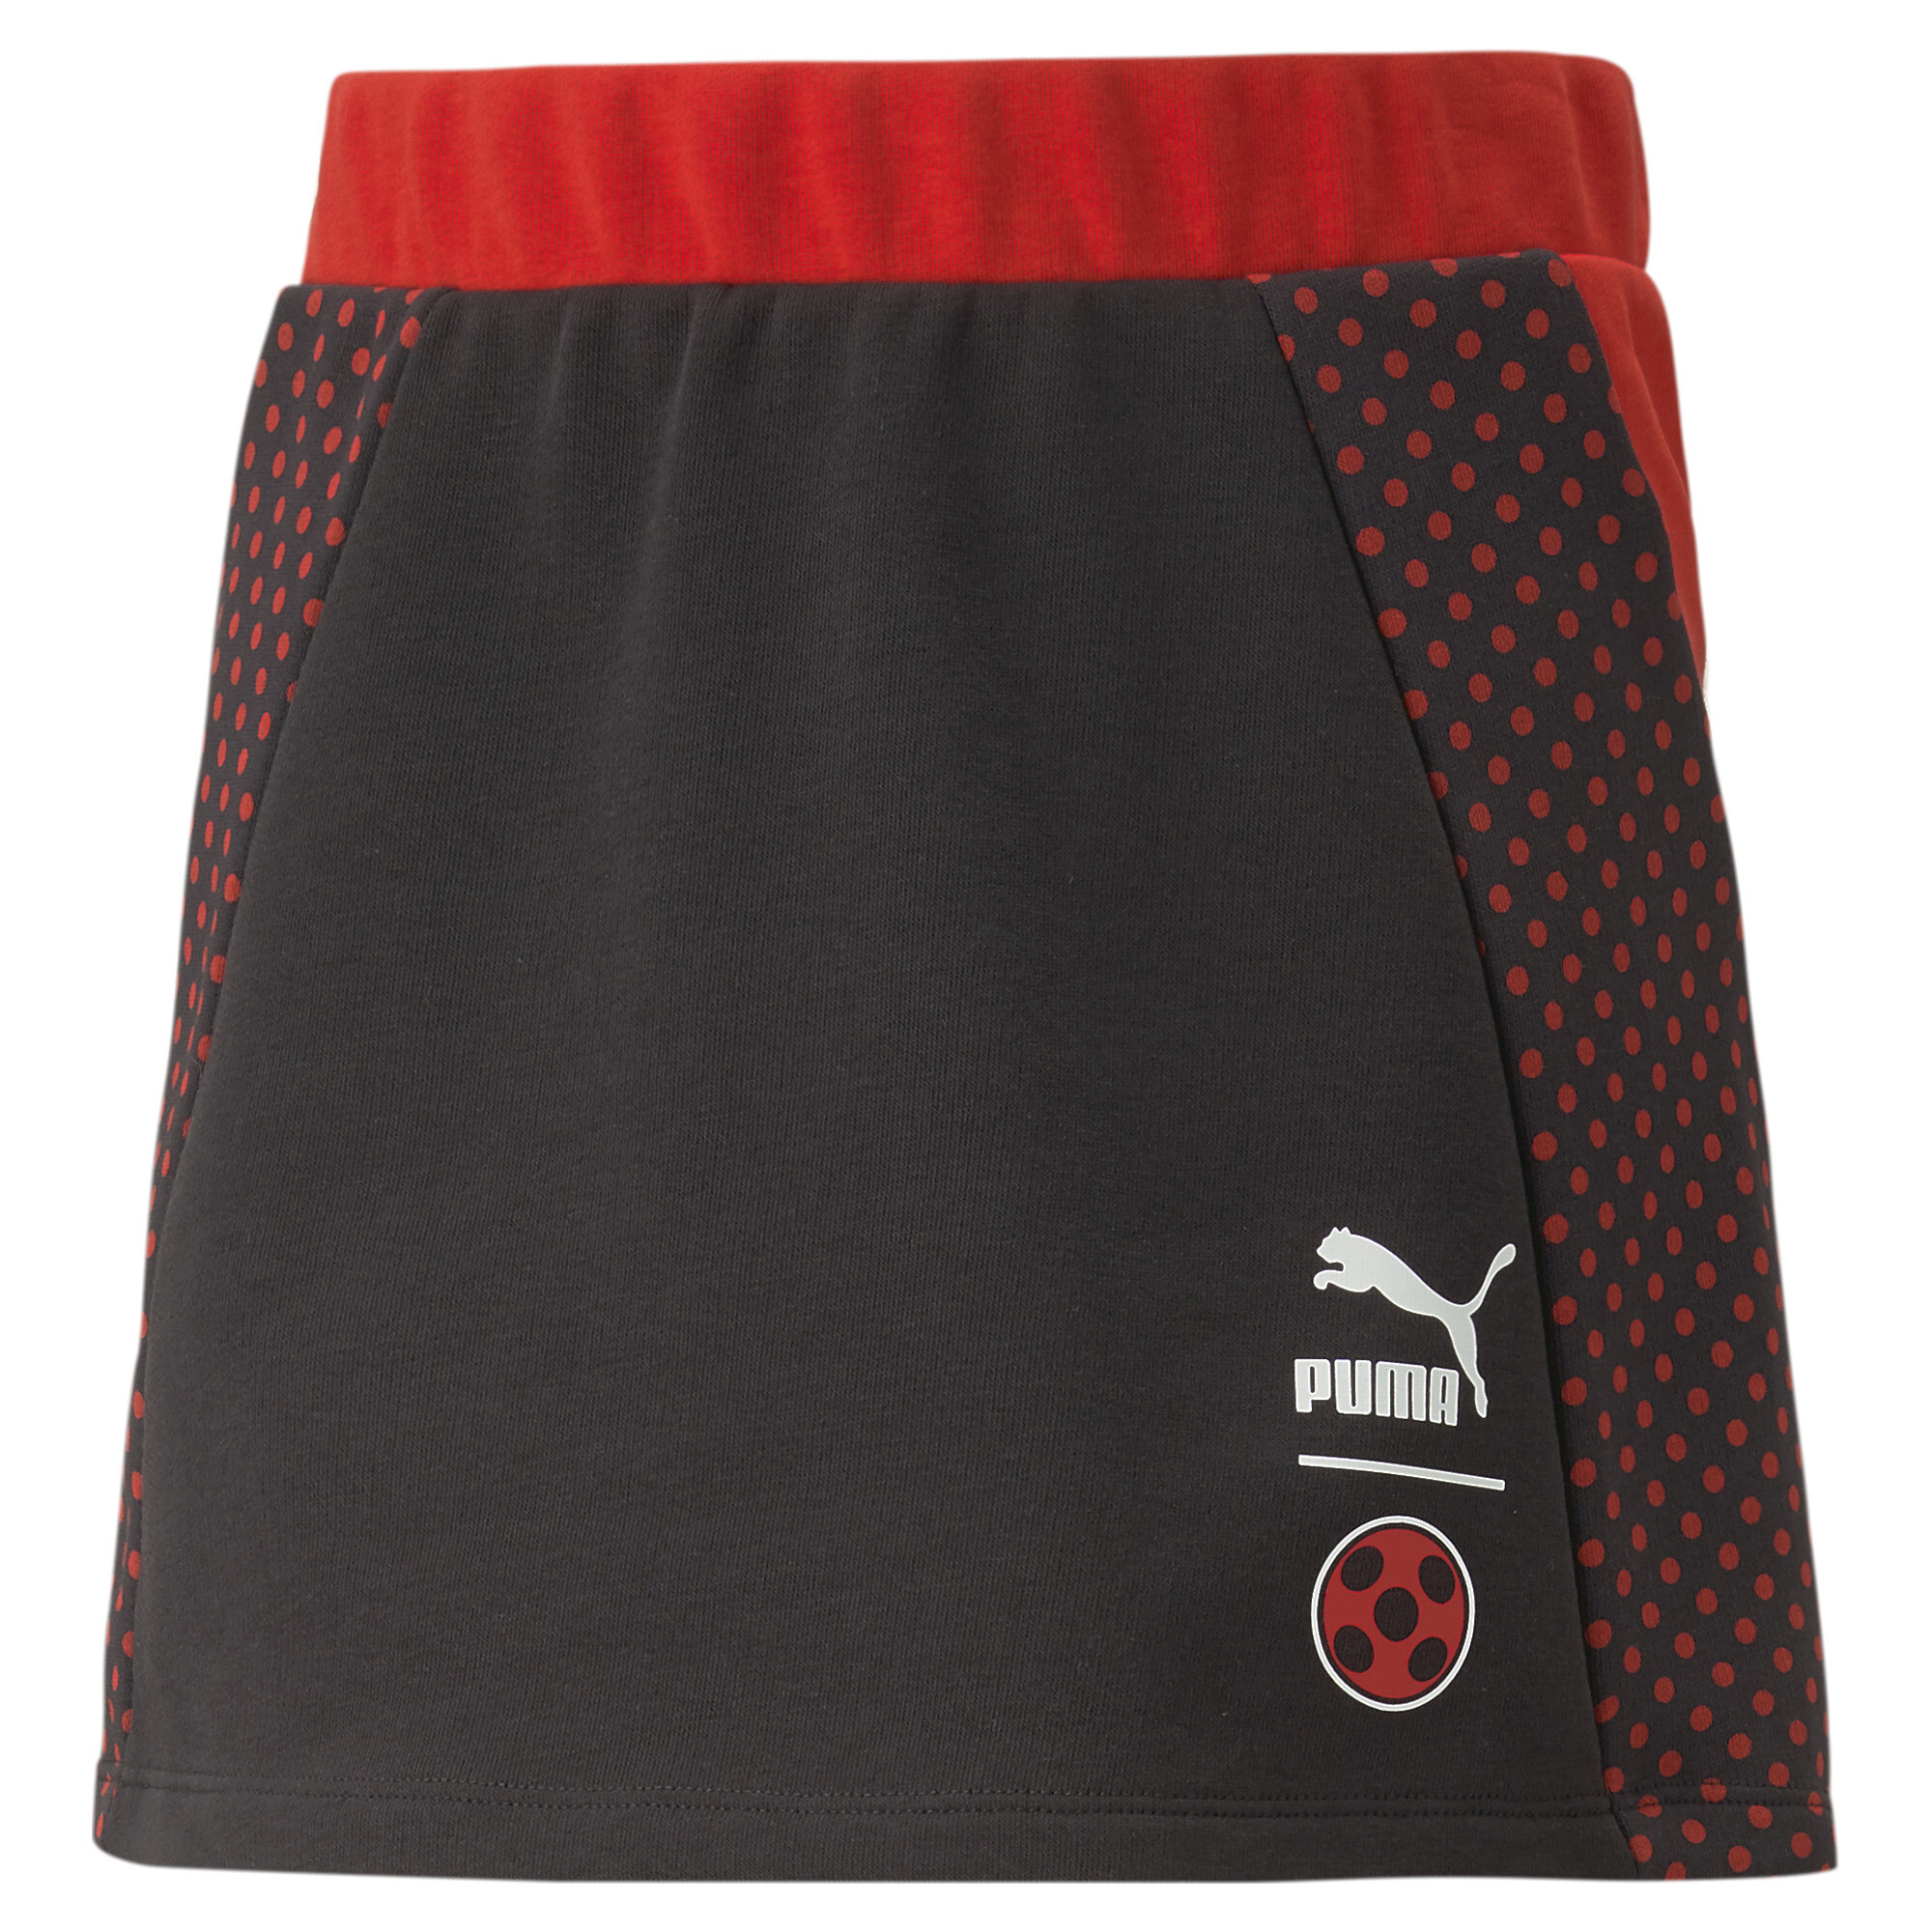 PUMA X MIRACULOUS Skirt In Black, Size 9-10 Youth